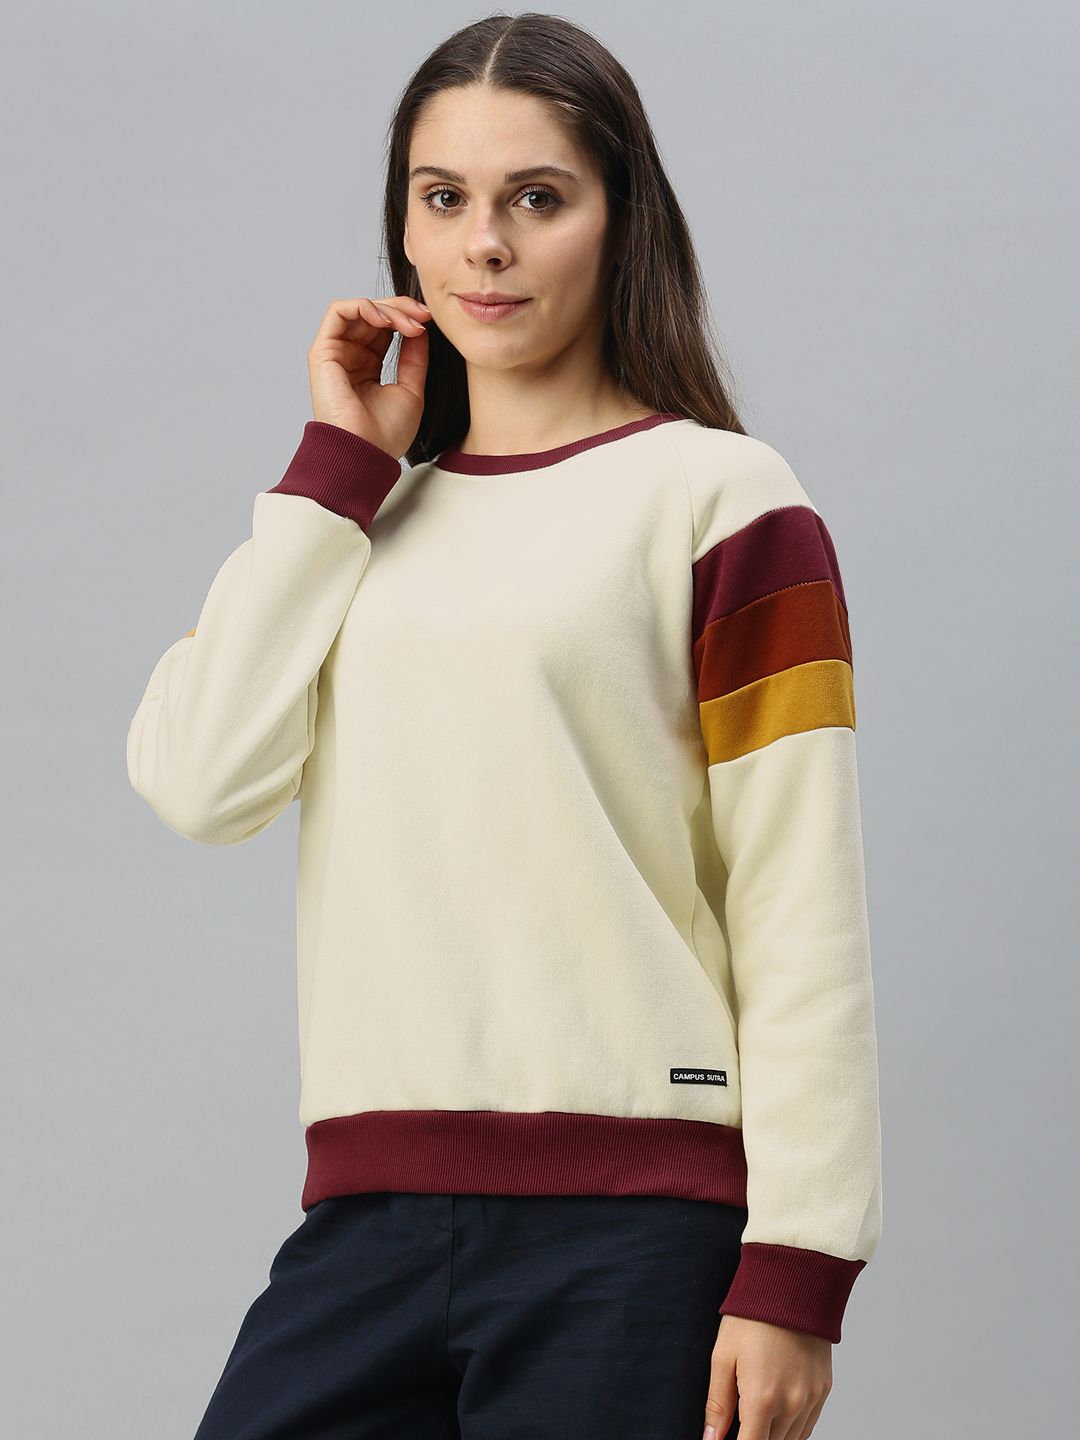 Campus Sutra Women Off White Pullover Sweatshirt with Striped Sleeves Price in India